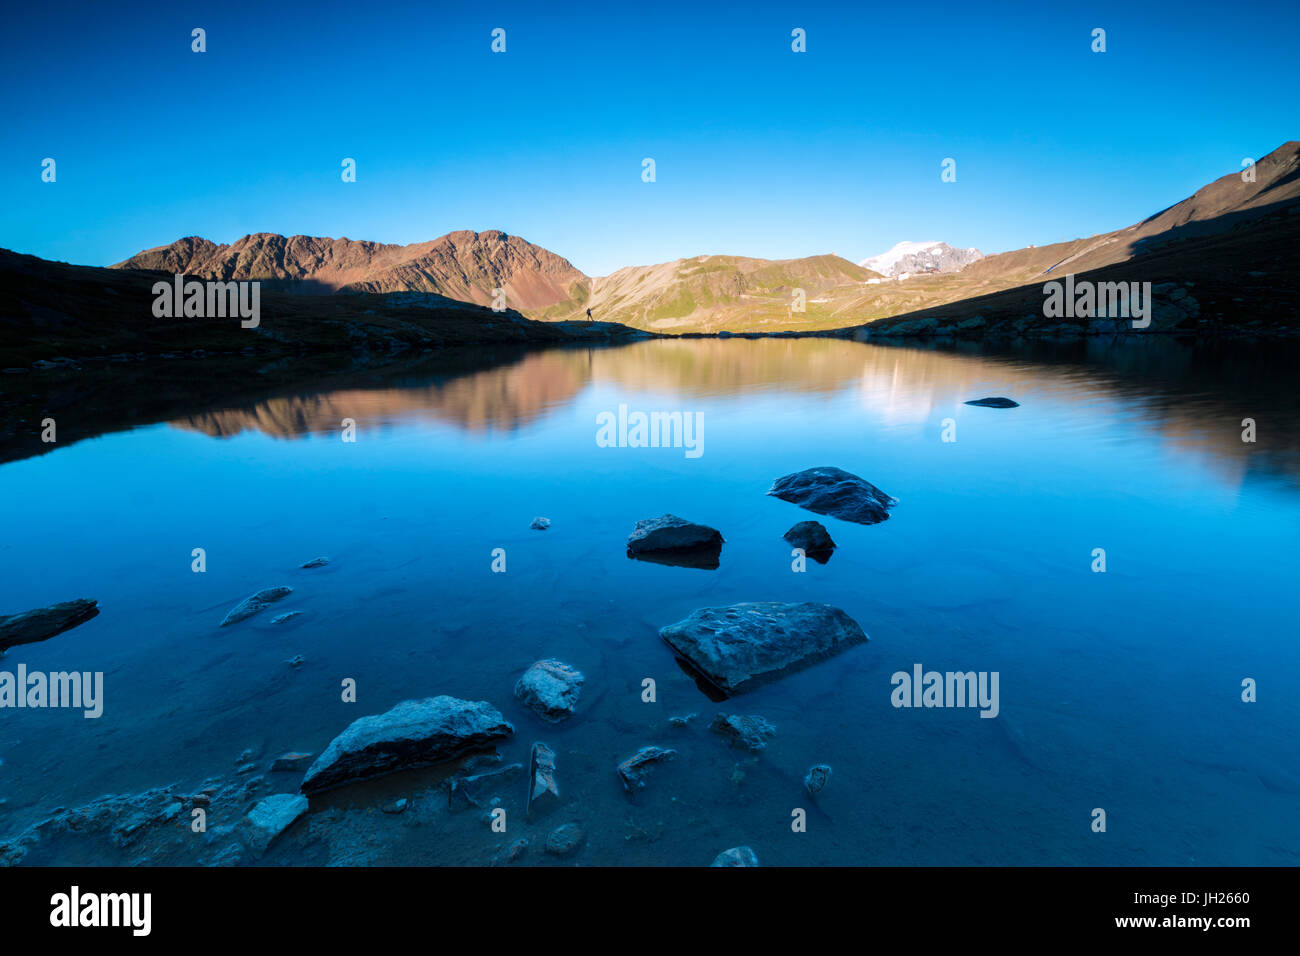 The rocky peaks reflected in Lake Umbrail at sunset, Stelvio Pass, Valtellina, Lombardy, Italy, Europe Stock Photo